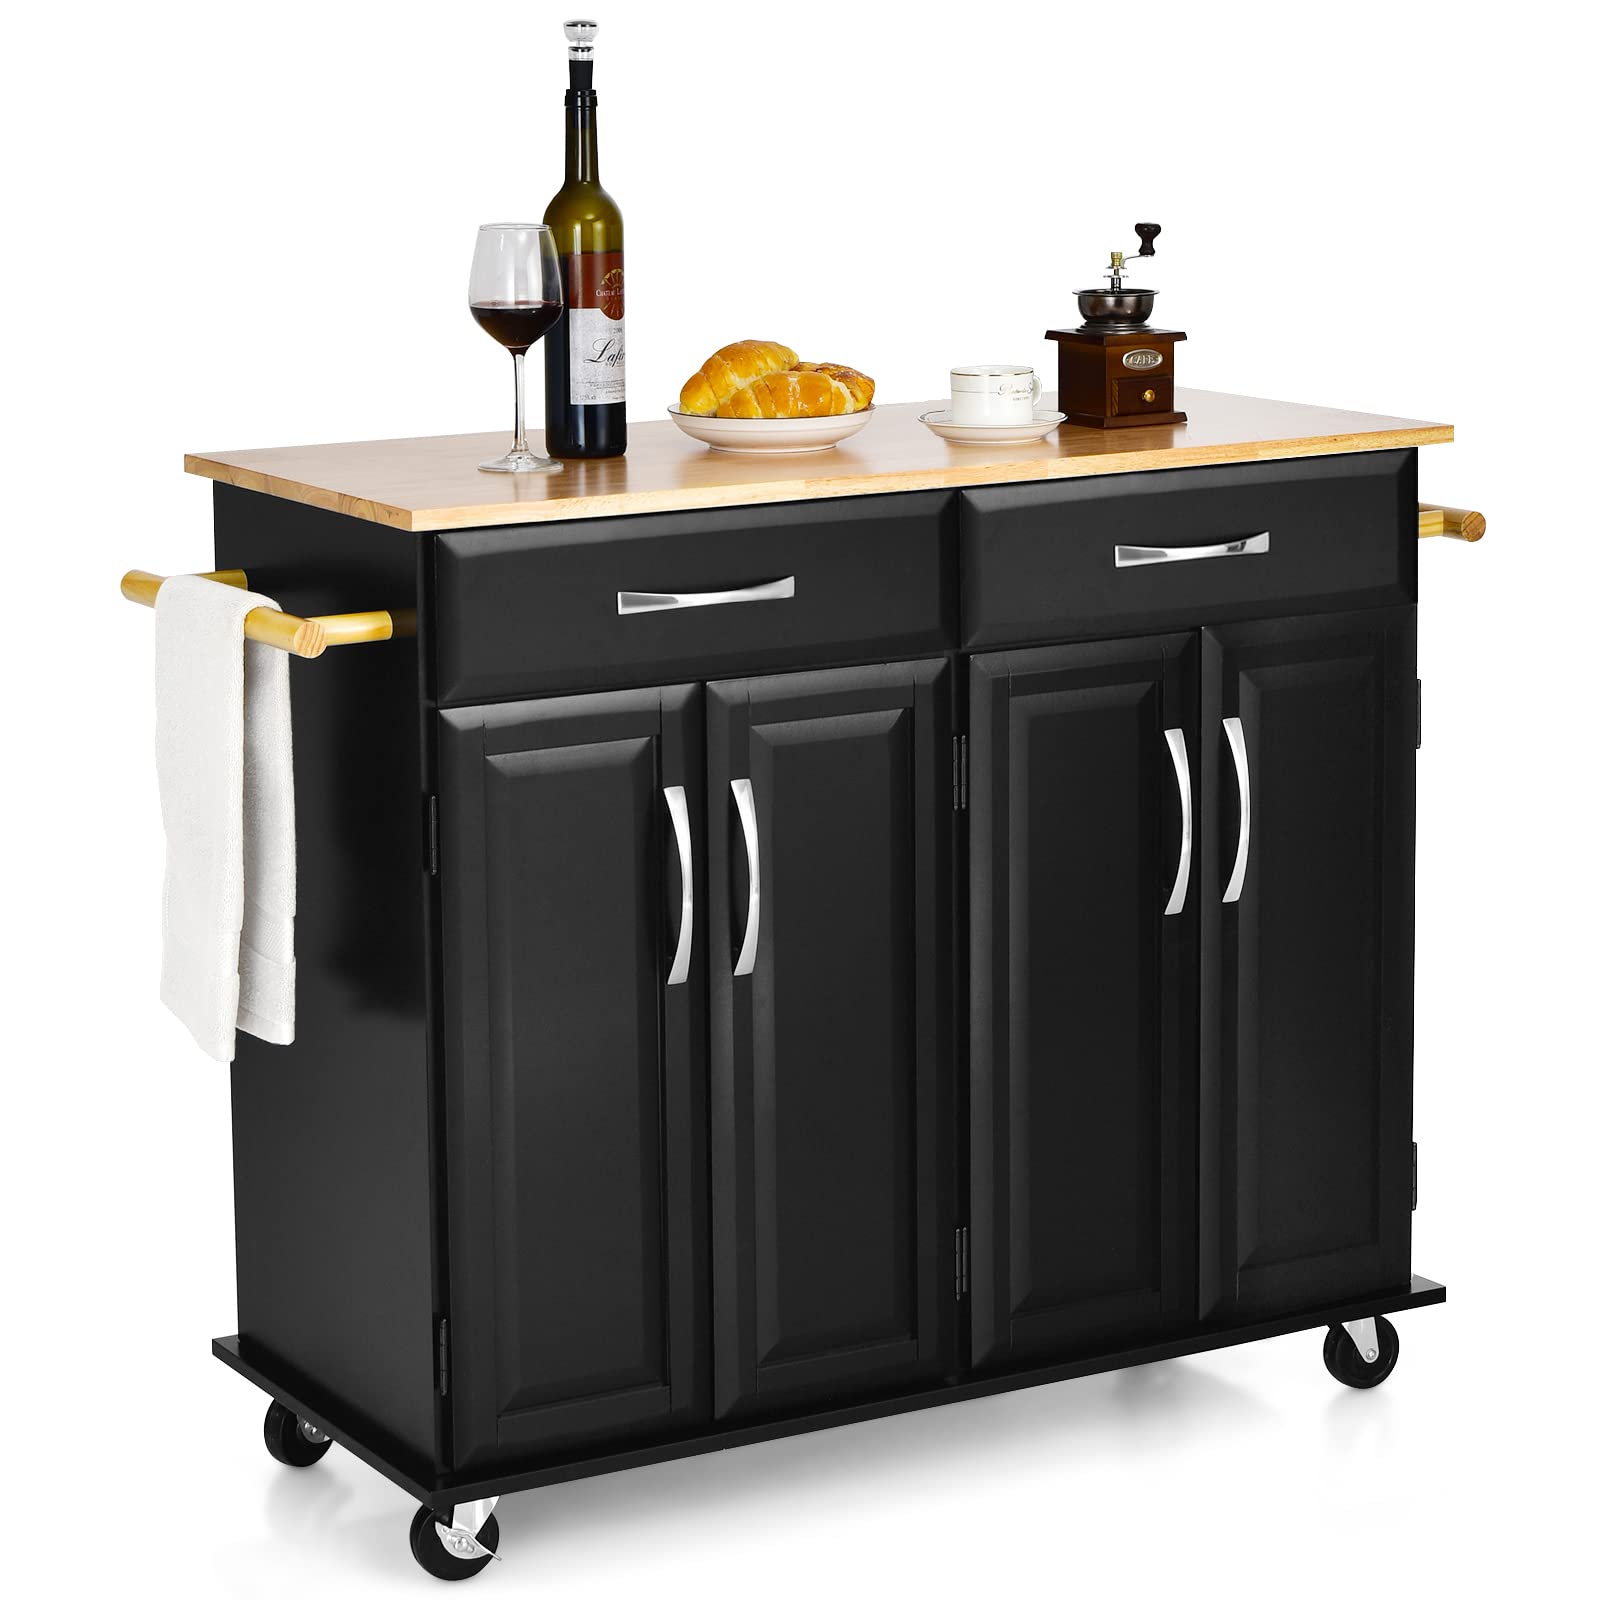 Giantex Mobile Kitchen Islands, Large Kitchen Cart with 2 Drawers